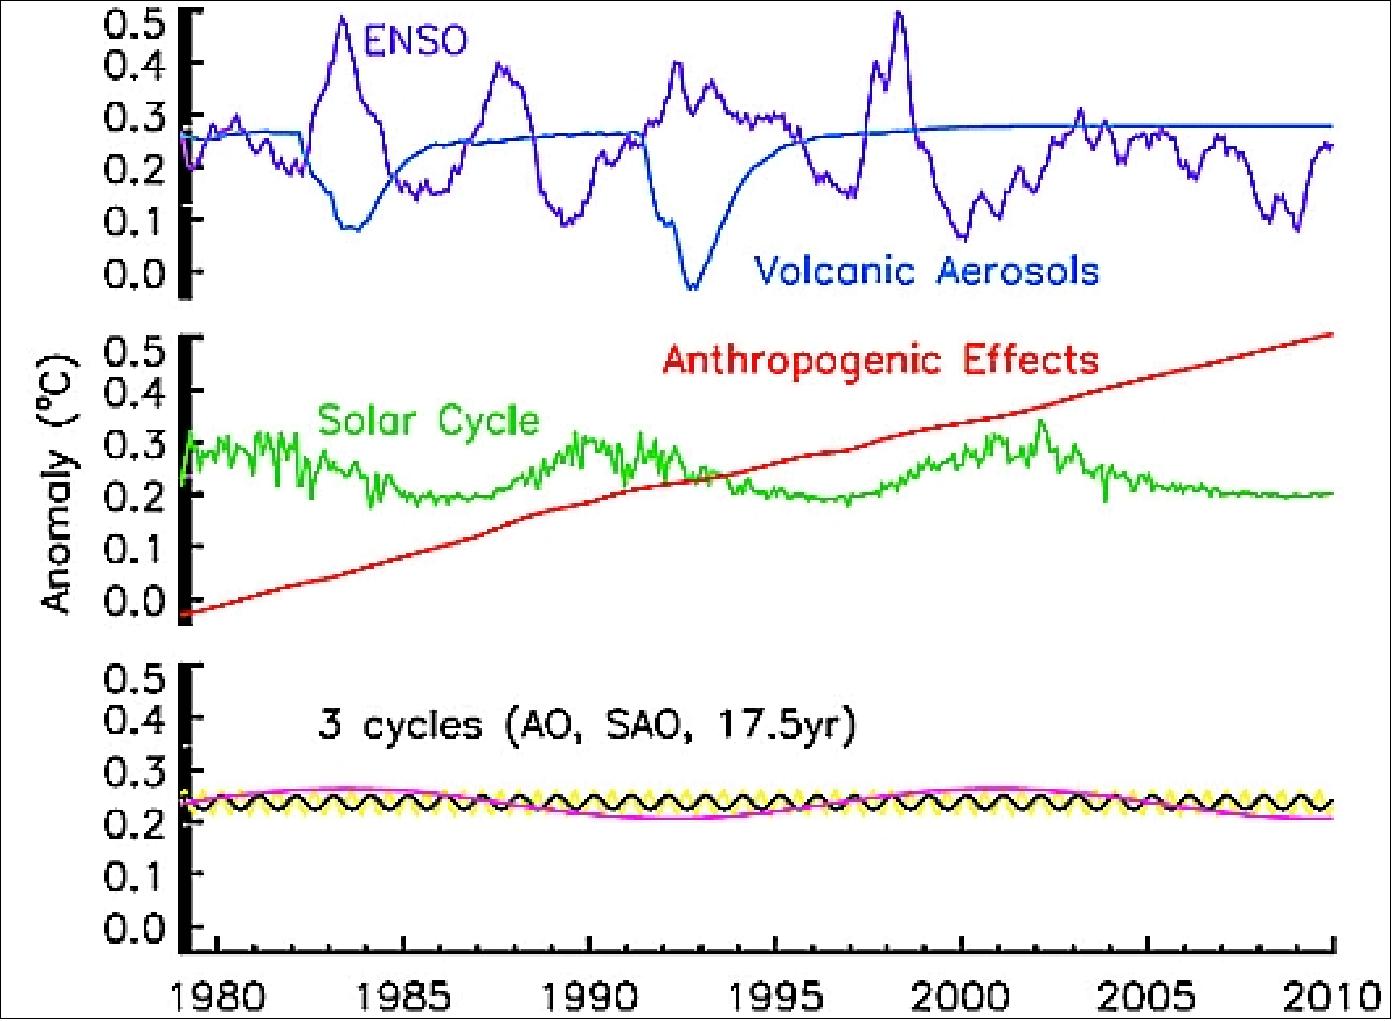 Figure 9: Long-term summary of contributions to the rising global surface temperature (image credit: Kopp, Lean)